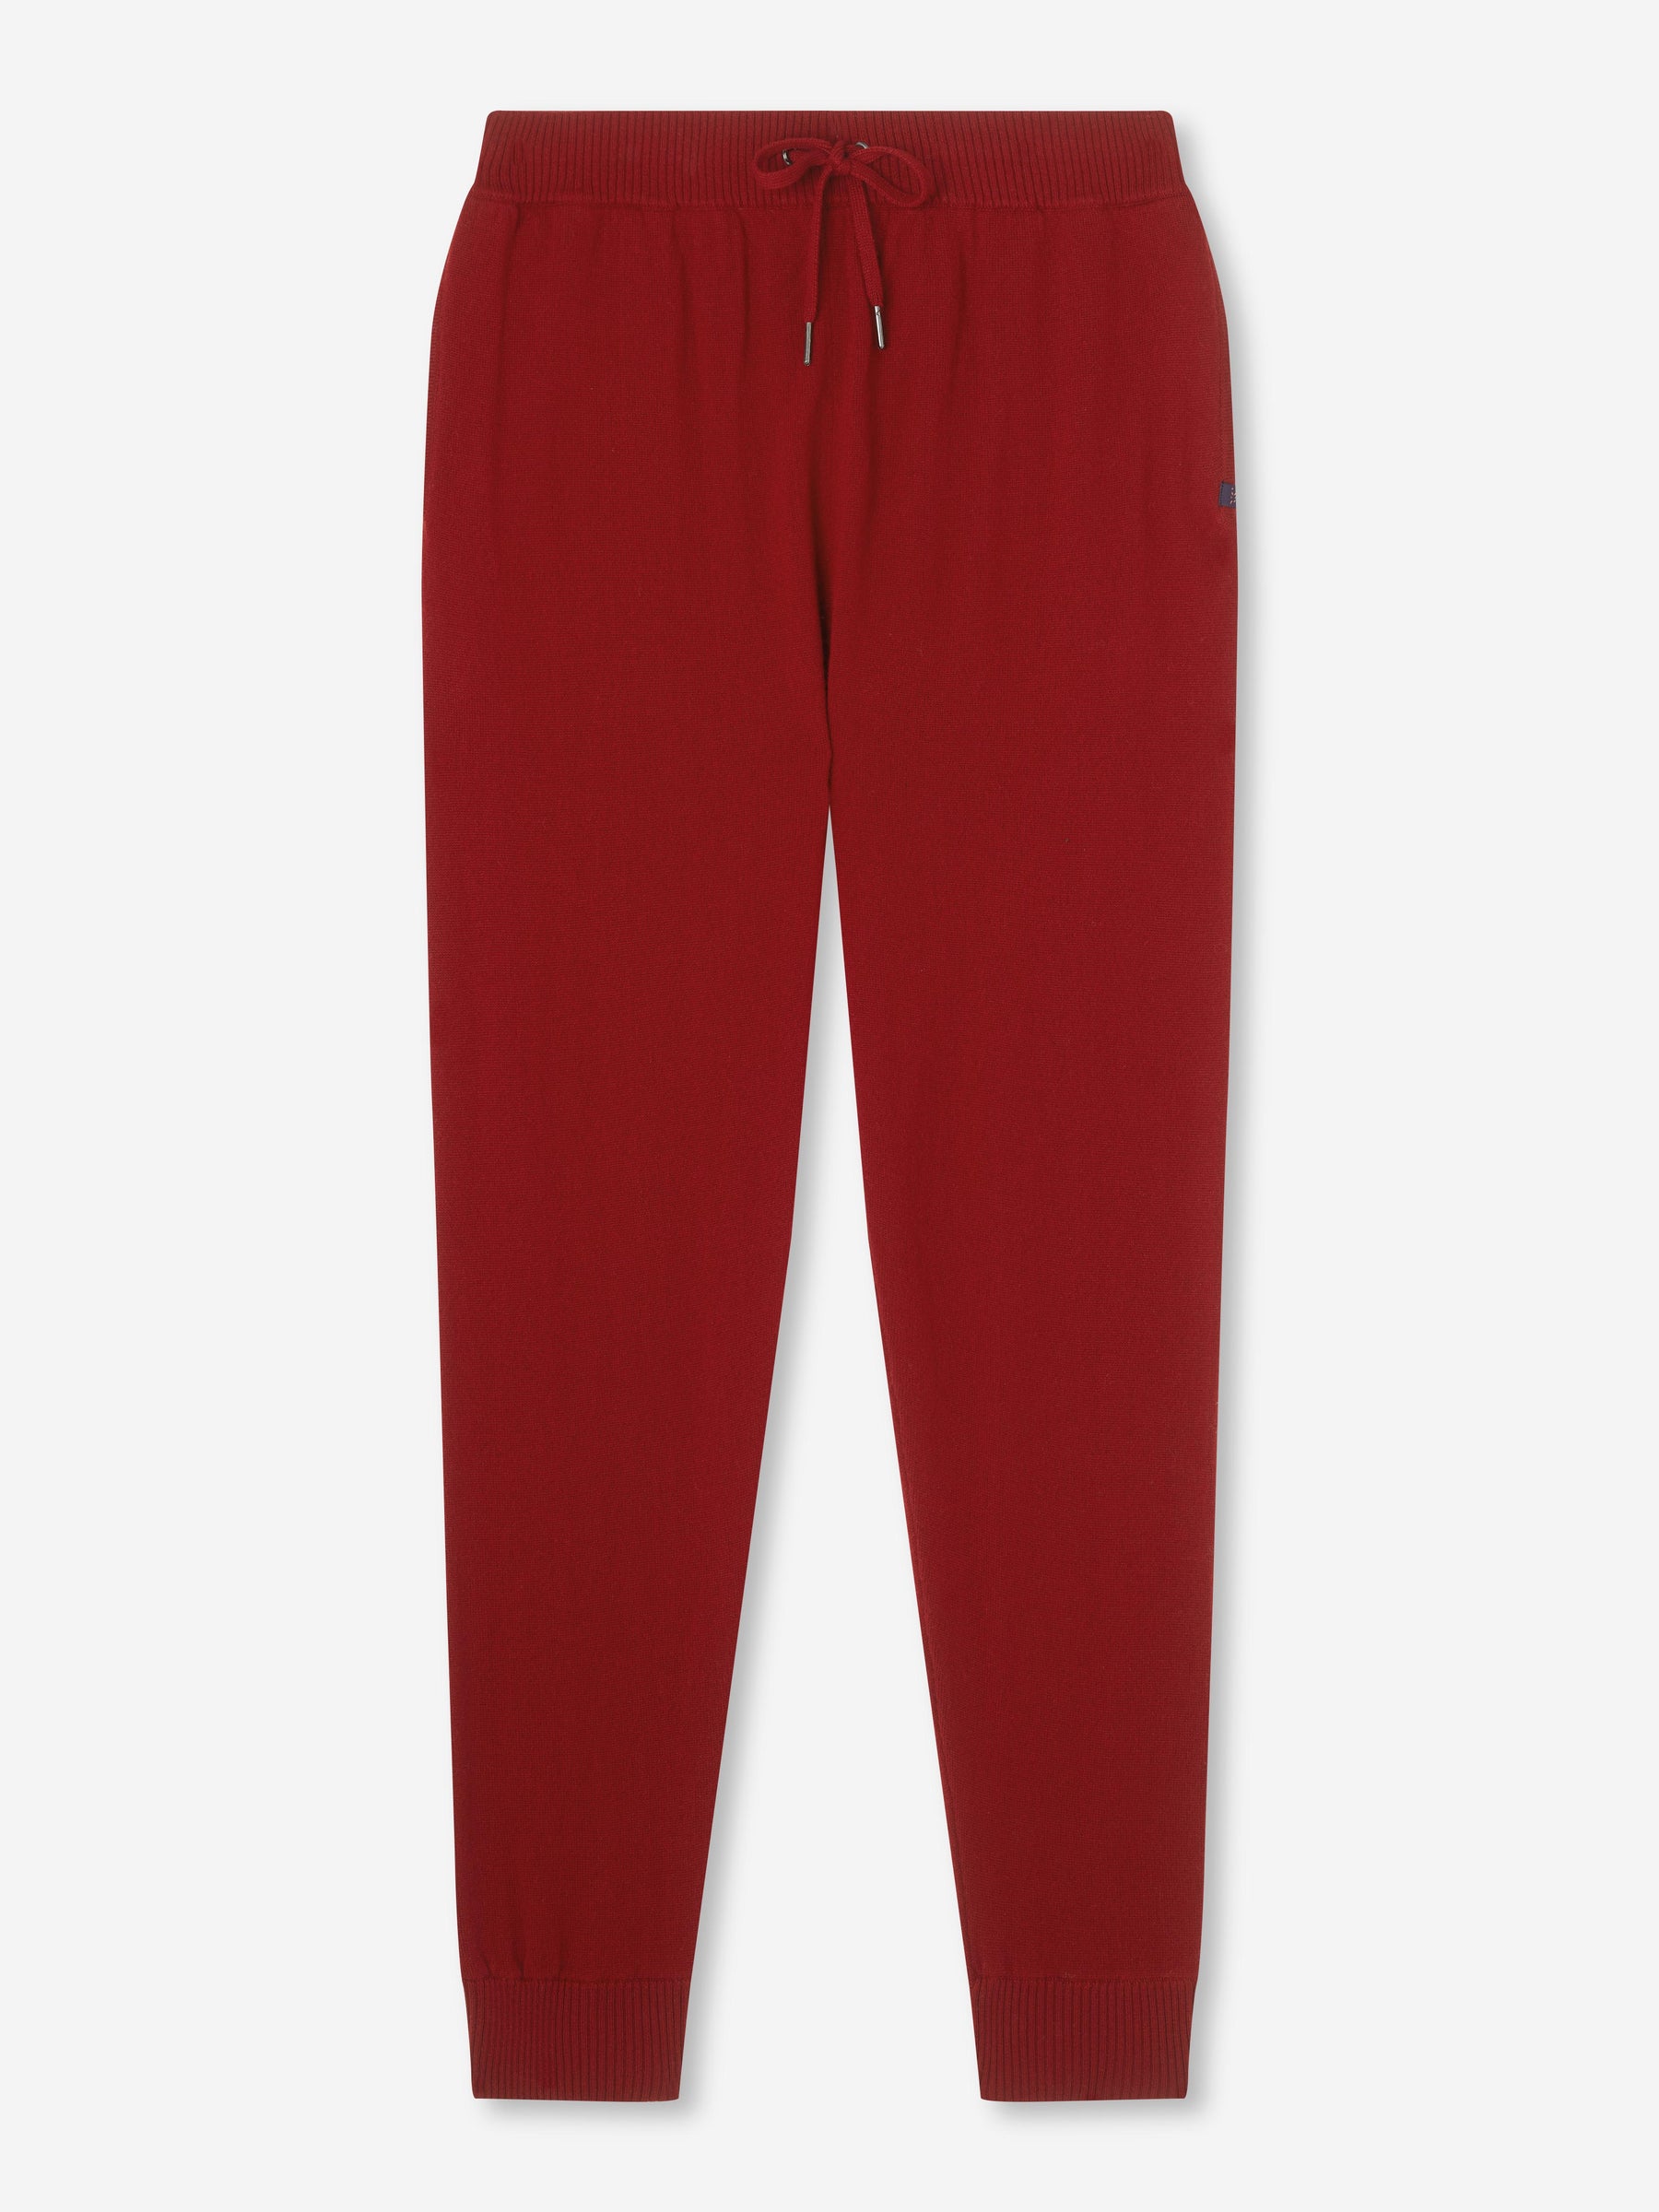 Men's Track Pants Finley Cashmere Deep Red